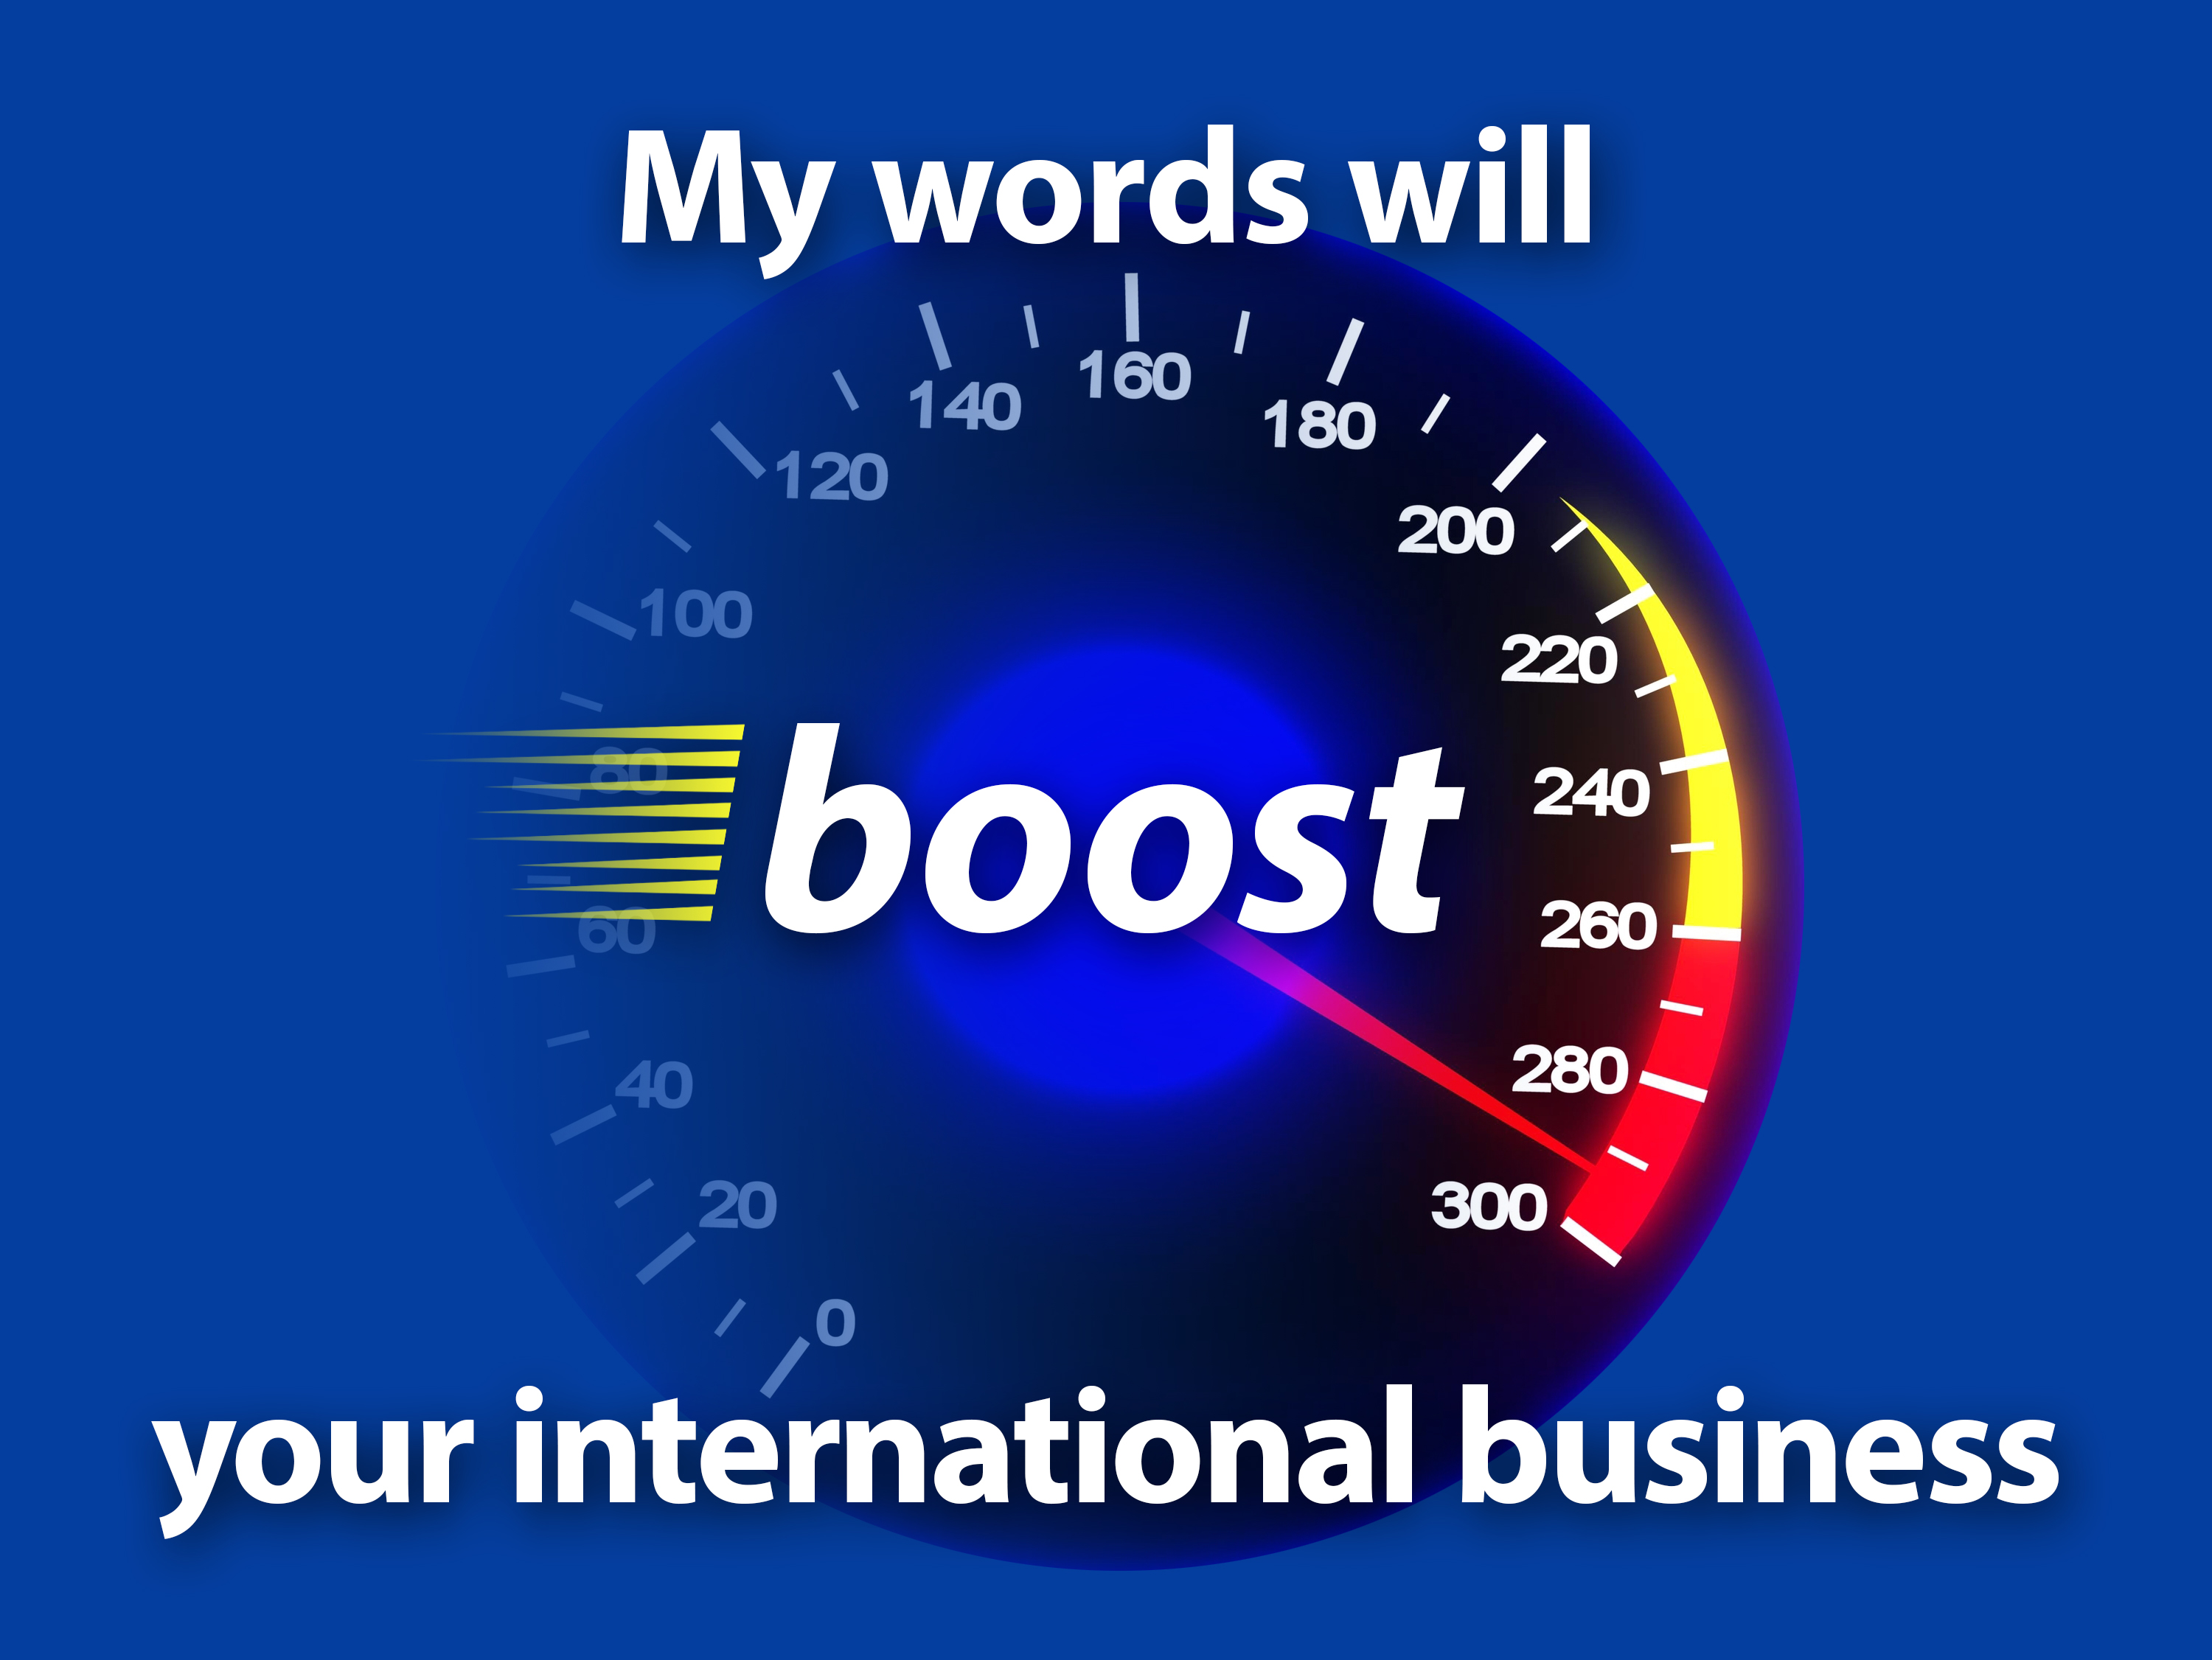 My words will boost your international business